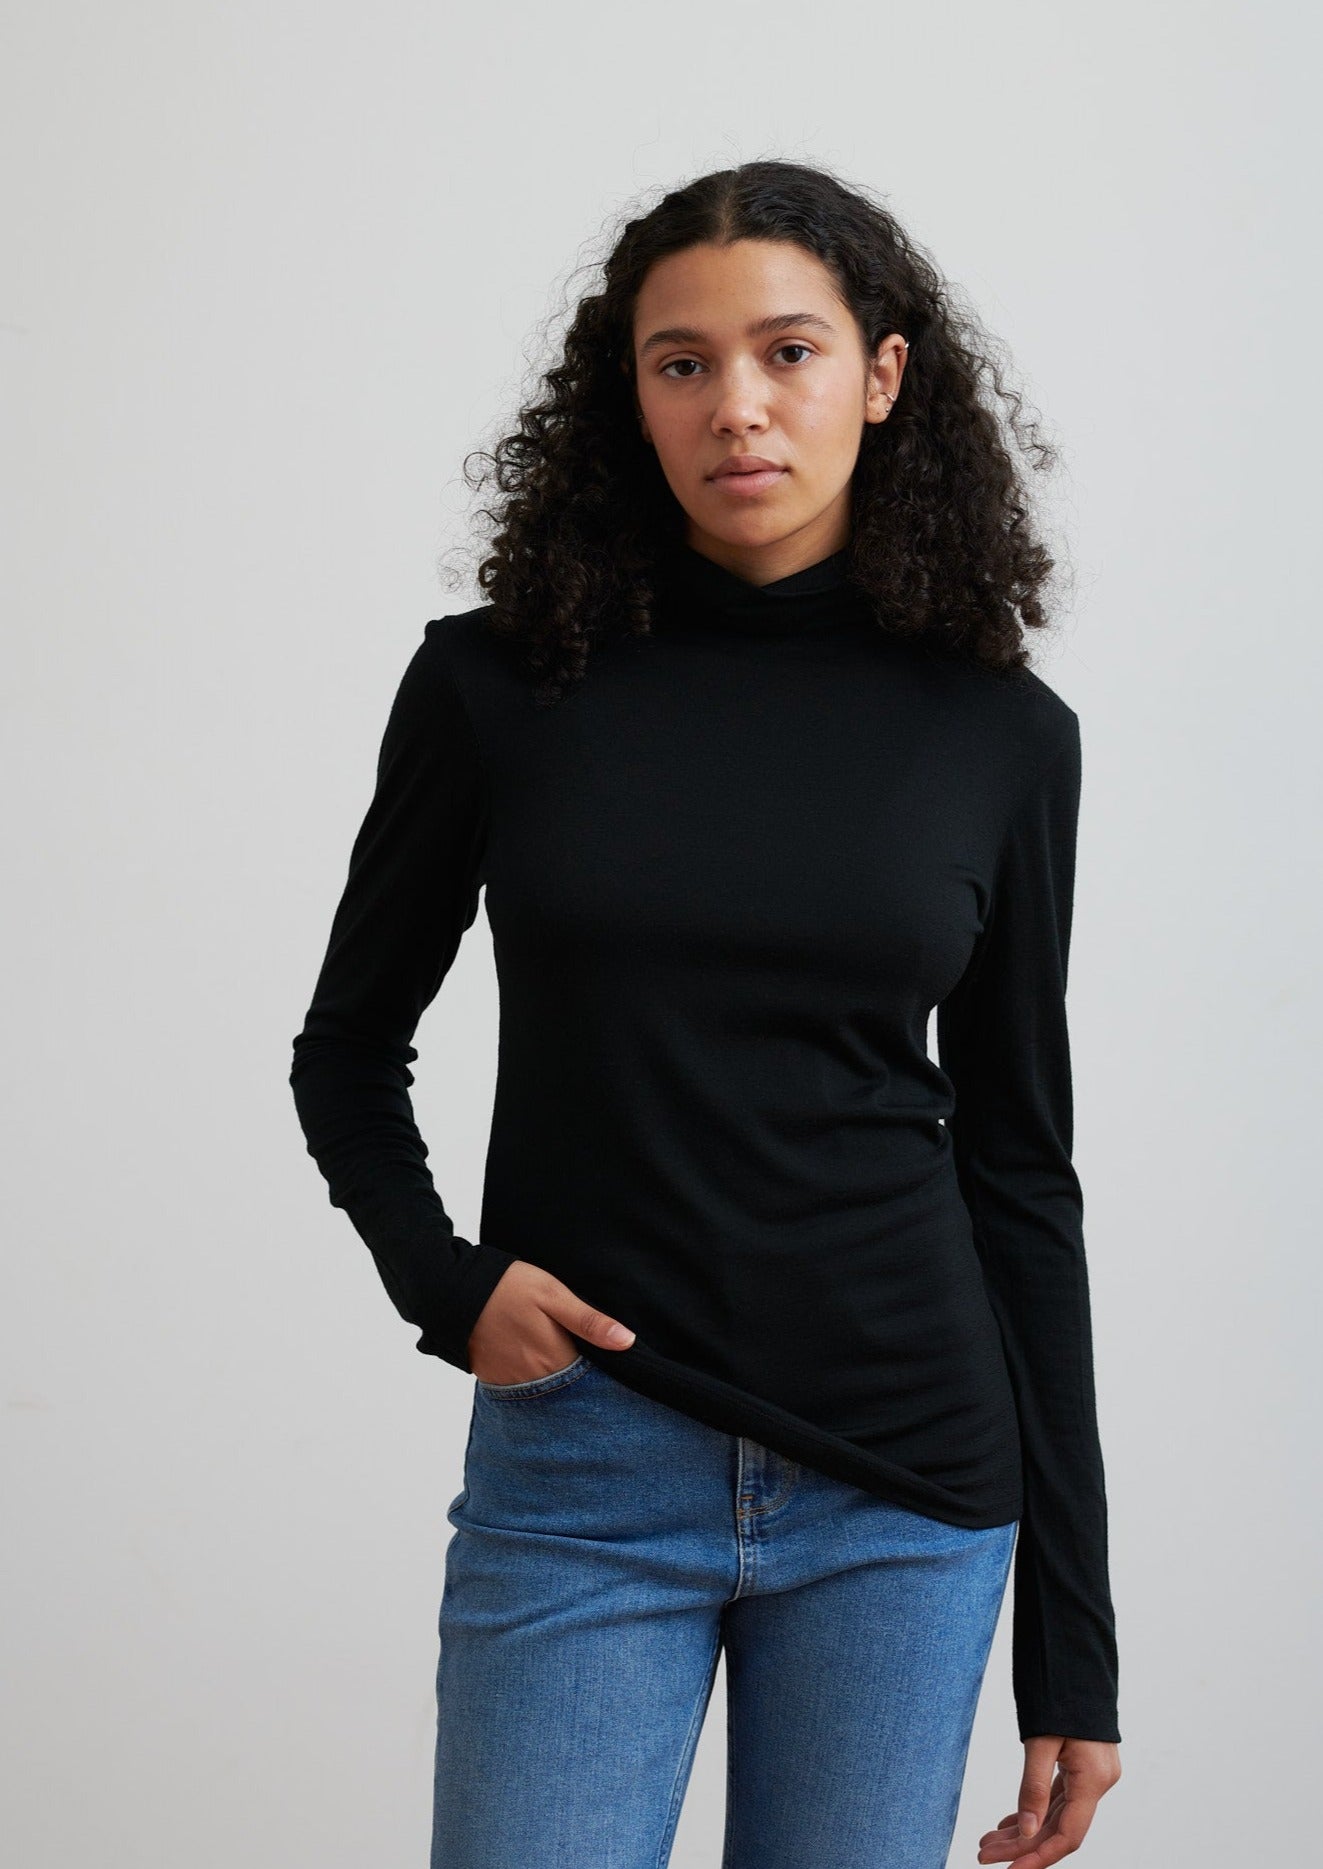 A timeless turtleneck, this layering essential in merino is soft and breathable and designed to wear all seasons